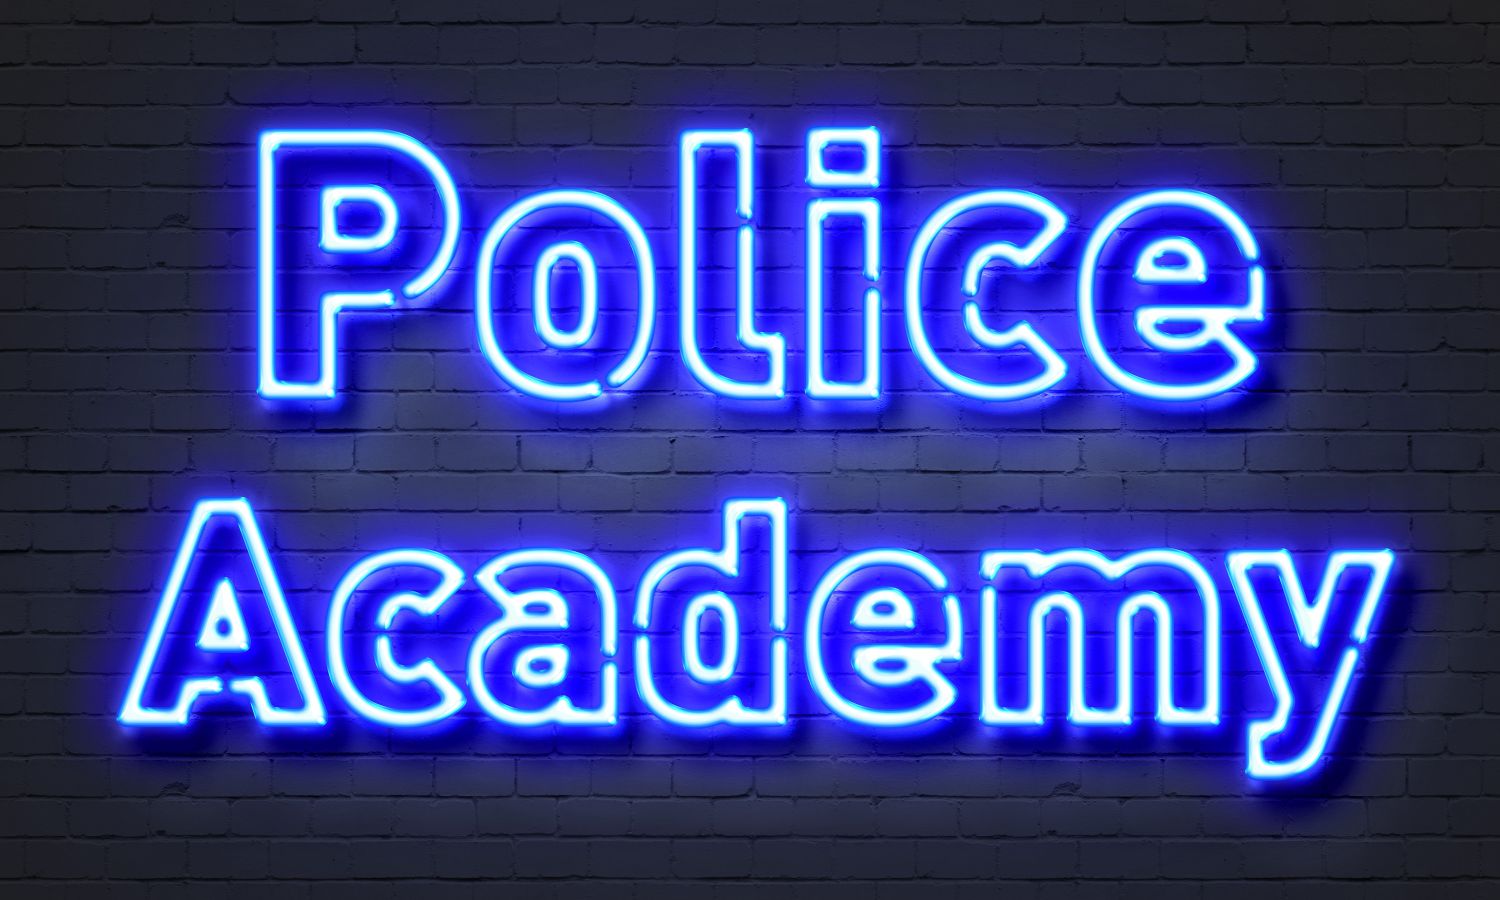 "Police Academy" a blue neon sign on a dark brick wall background